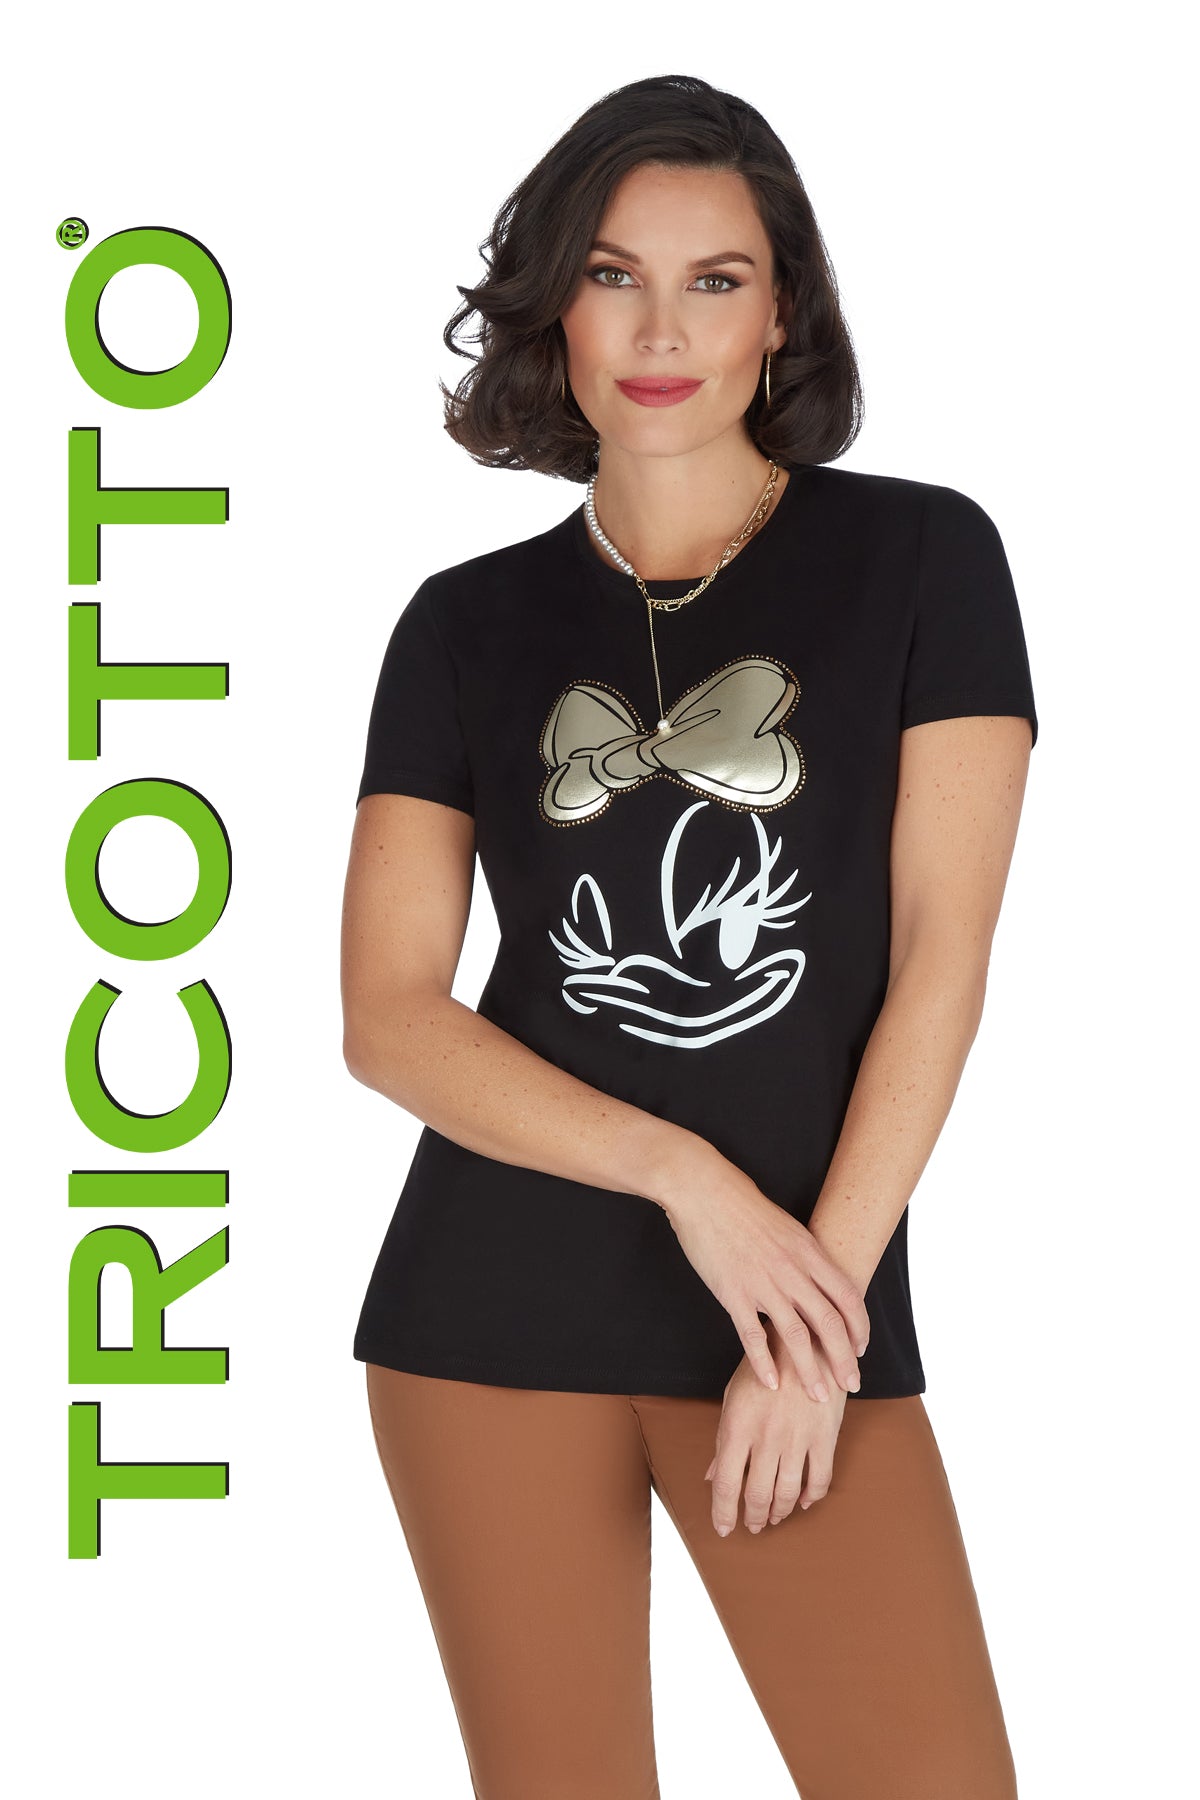 Tricotto T-shirts-Buy Tricotto T-shirts Online-Tricotto Clothing Montreal-Tricotto Clothing Quebec-Tricotto Jeans